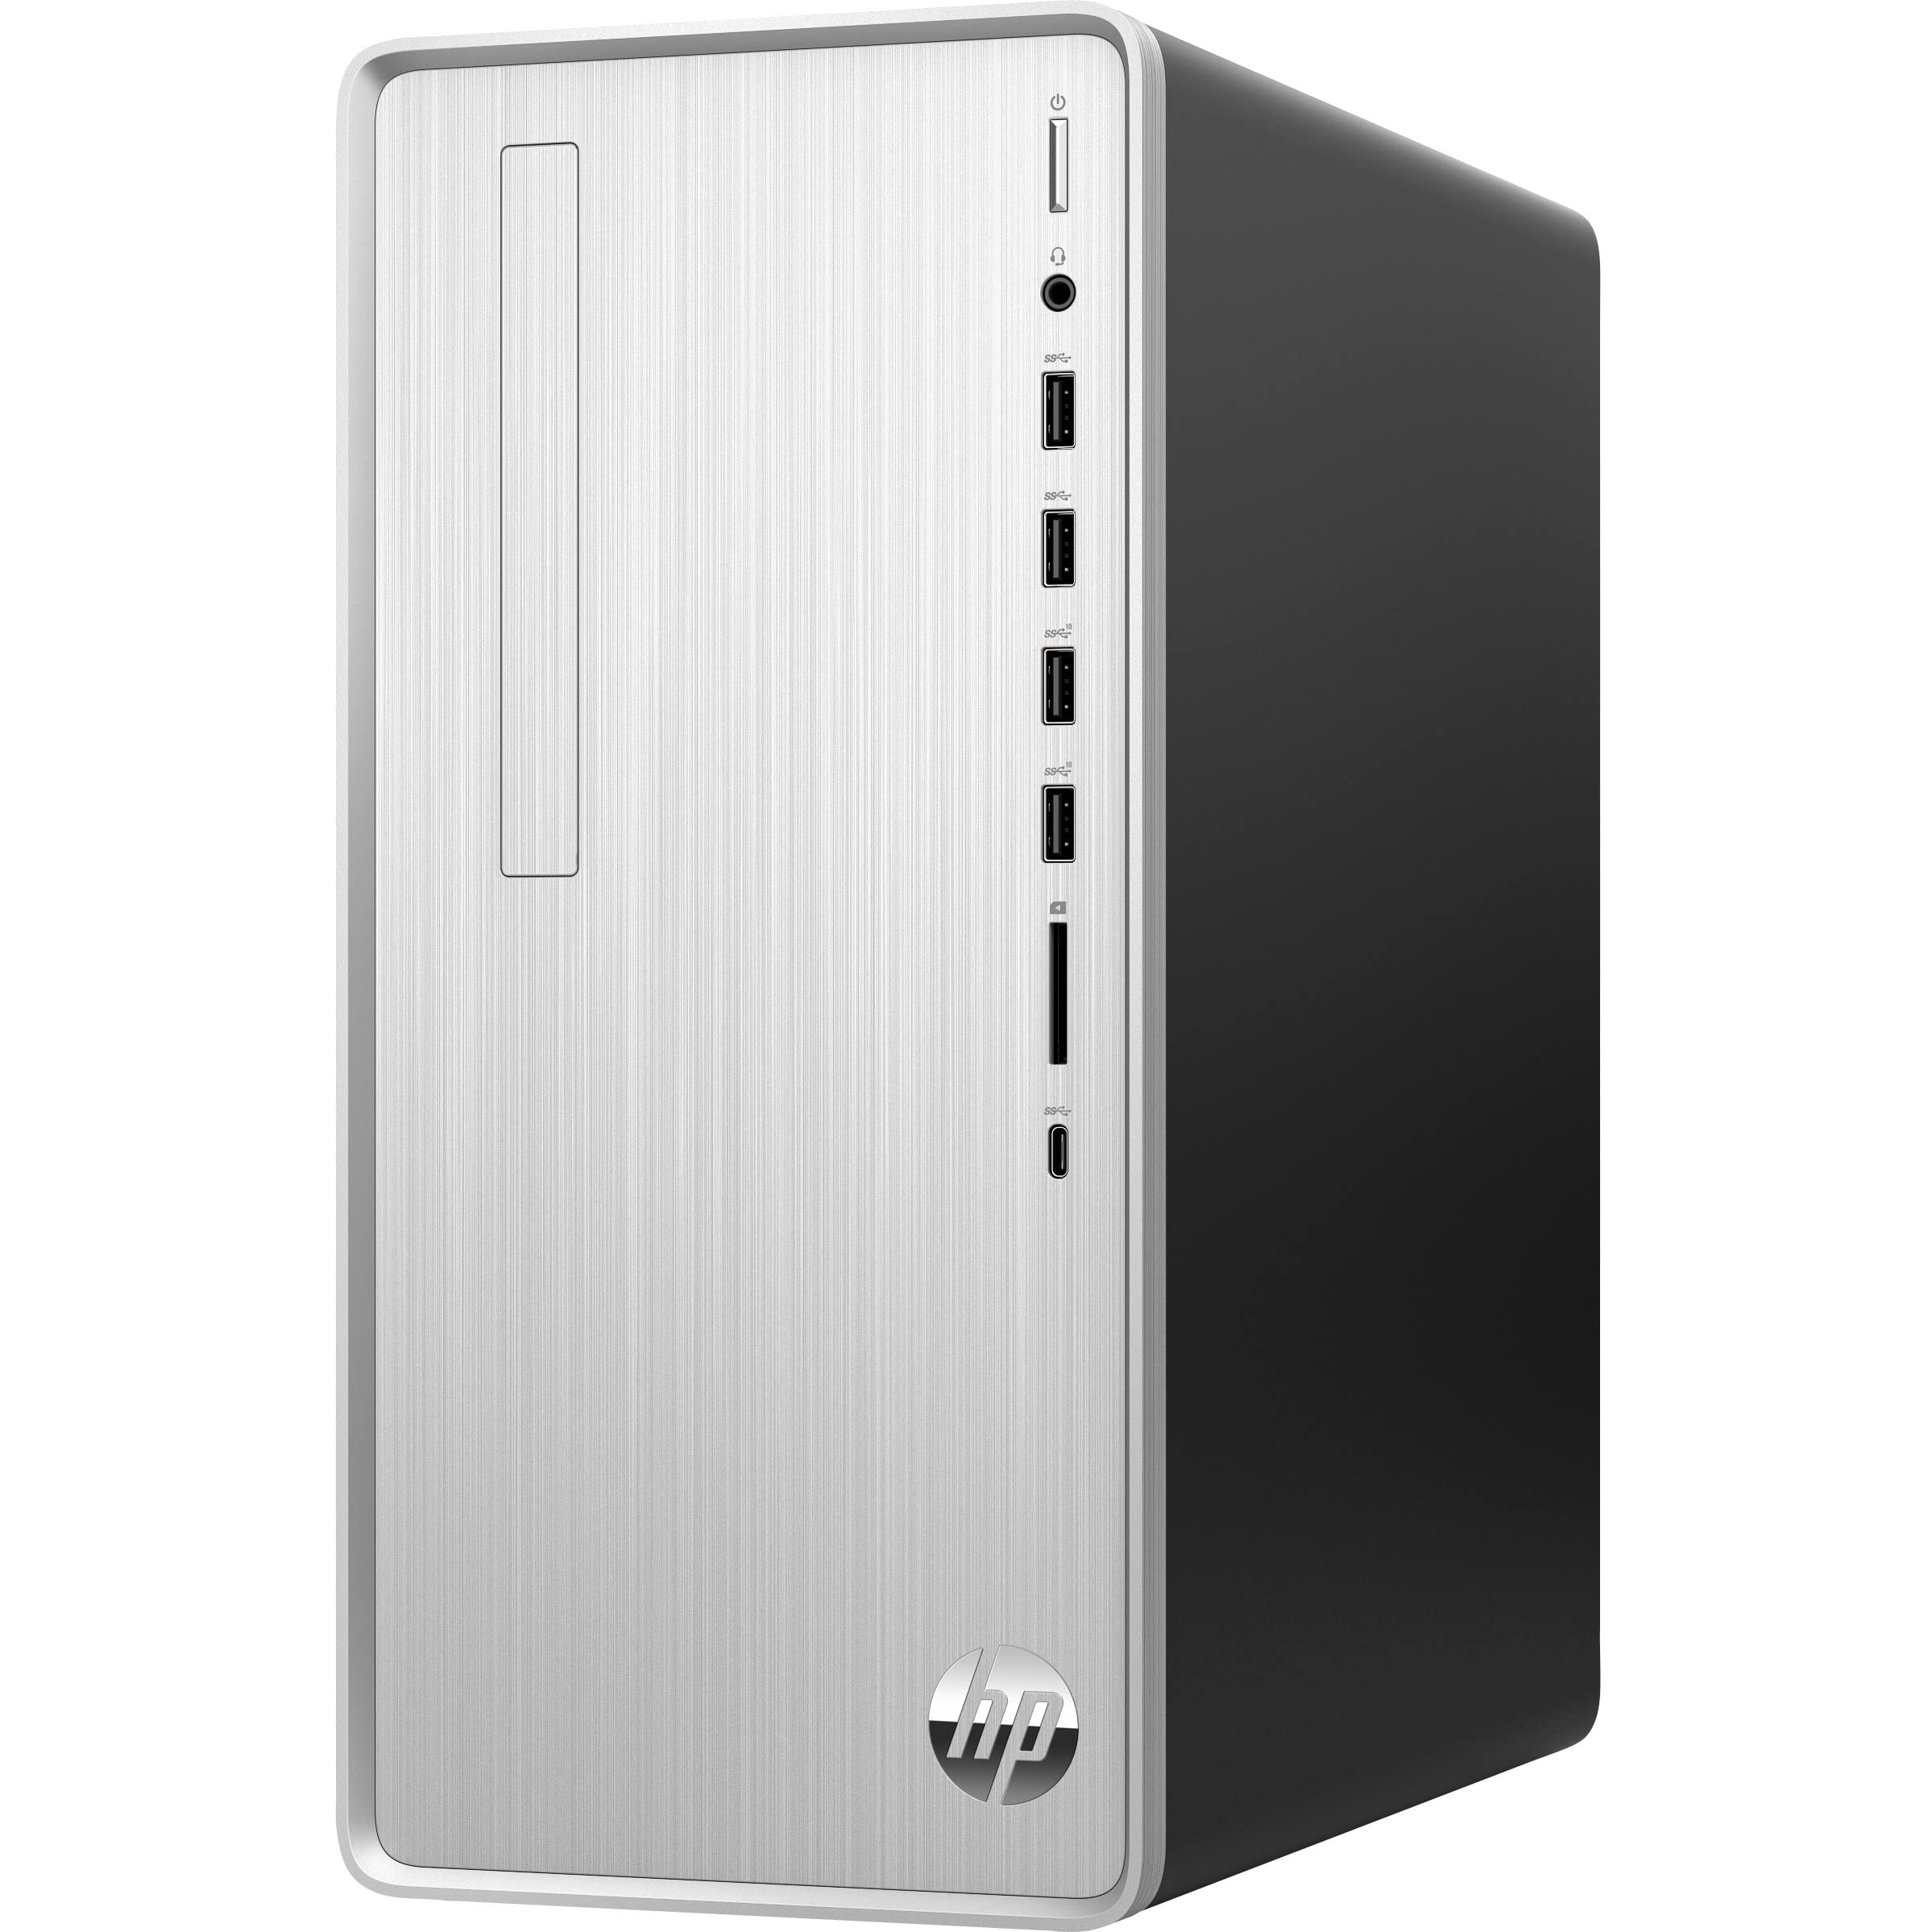 HP Pavilion Desktop PC, AMD Ryzen 5 5600G, 12 GB RAM, 512 GB SSD, Windows 11 Home, Wi-Fi 5 & Bluetooth Connectivity, 9 USB Ports, Wired Keyboard and Mouse Combo, Pre-Built PC Tower (TP01-2040, 2022)